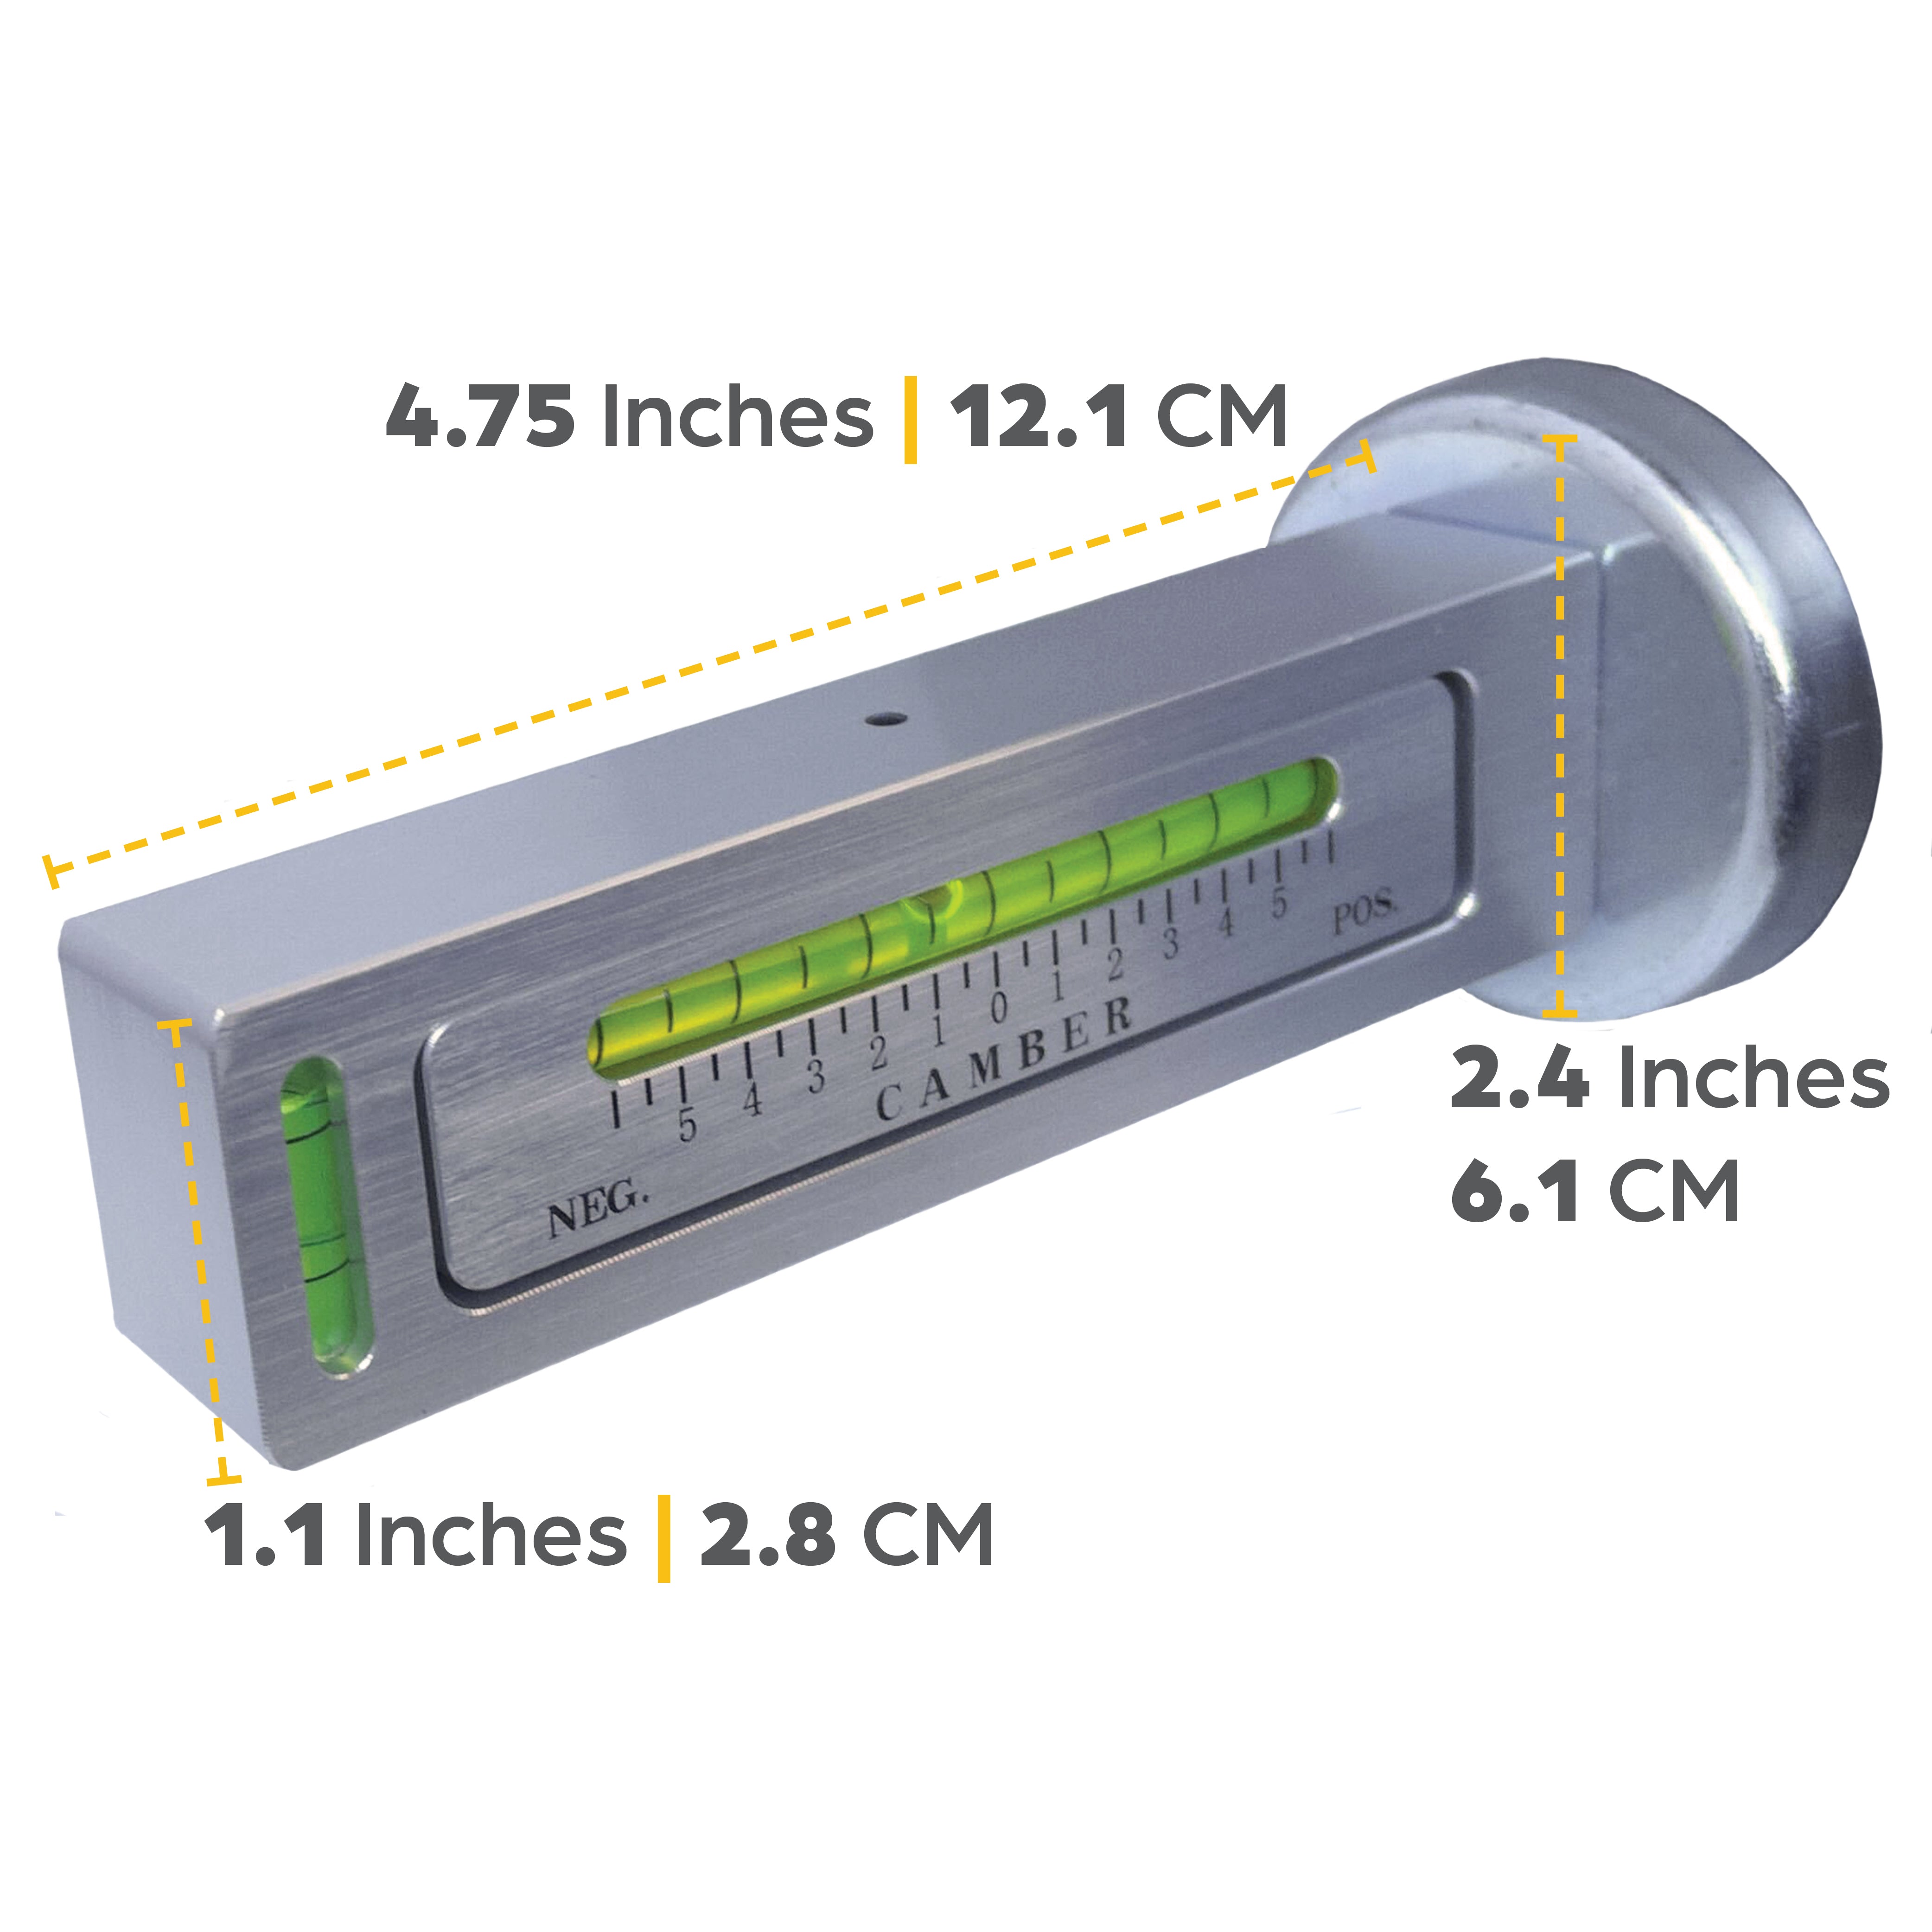 Dimensions of AutoSolo magnetic camber gauge